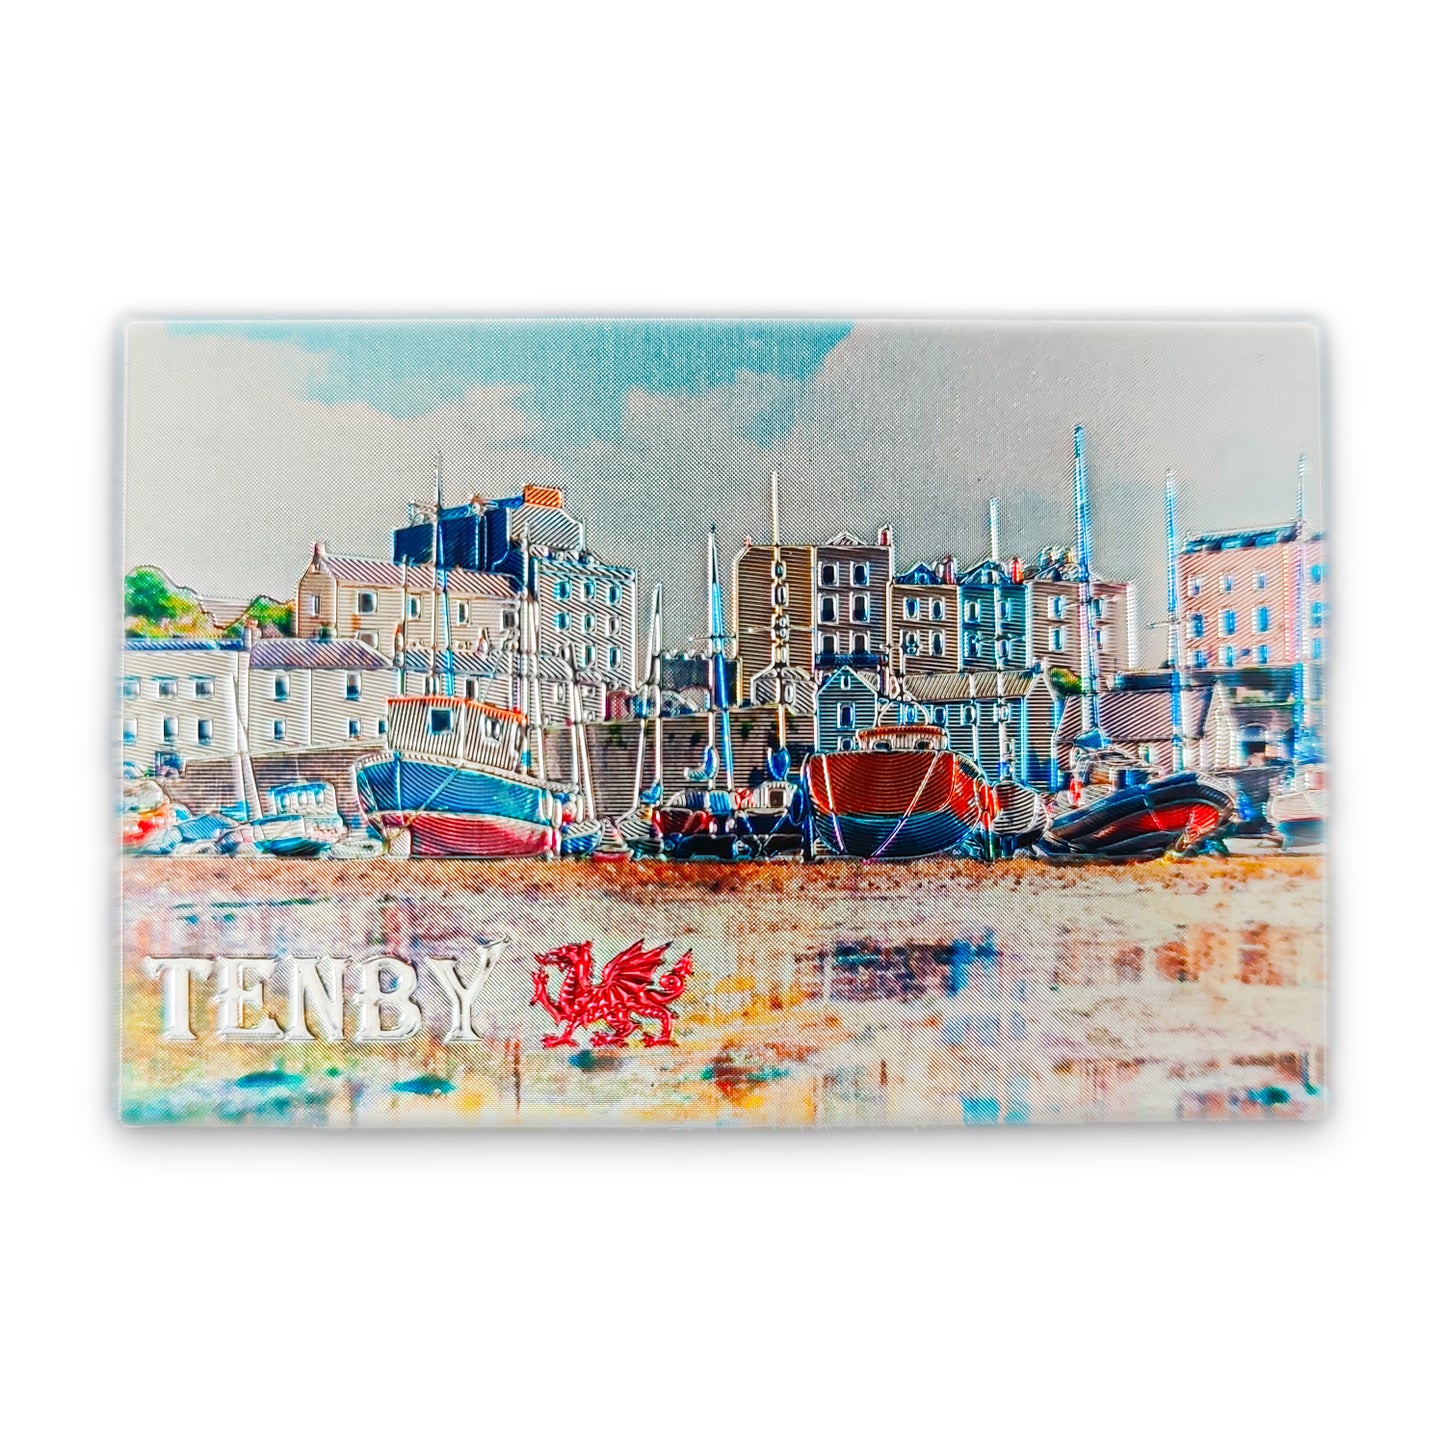 Tenby Boat Magnet (MGF022)